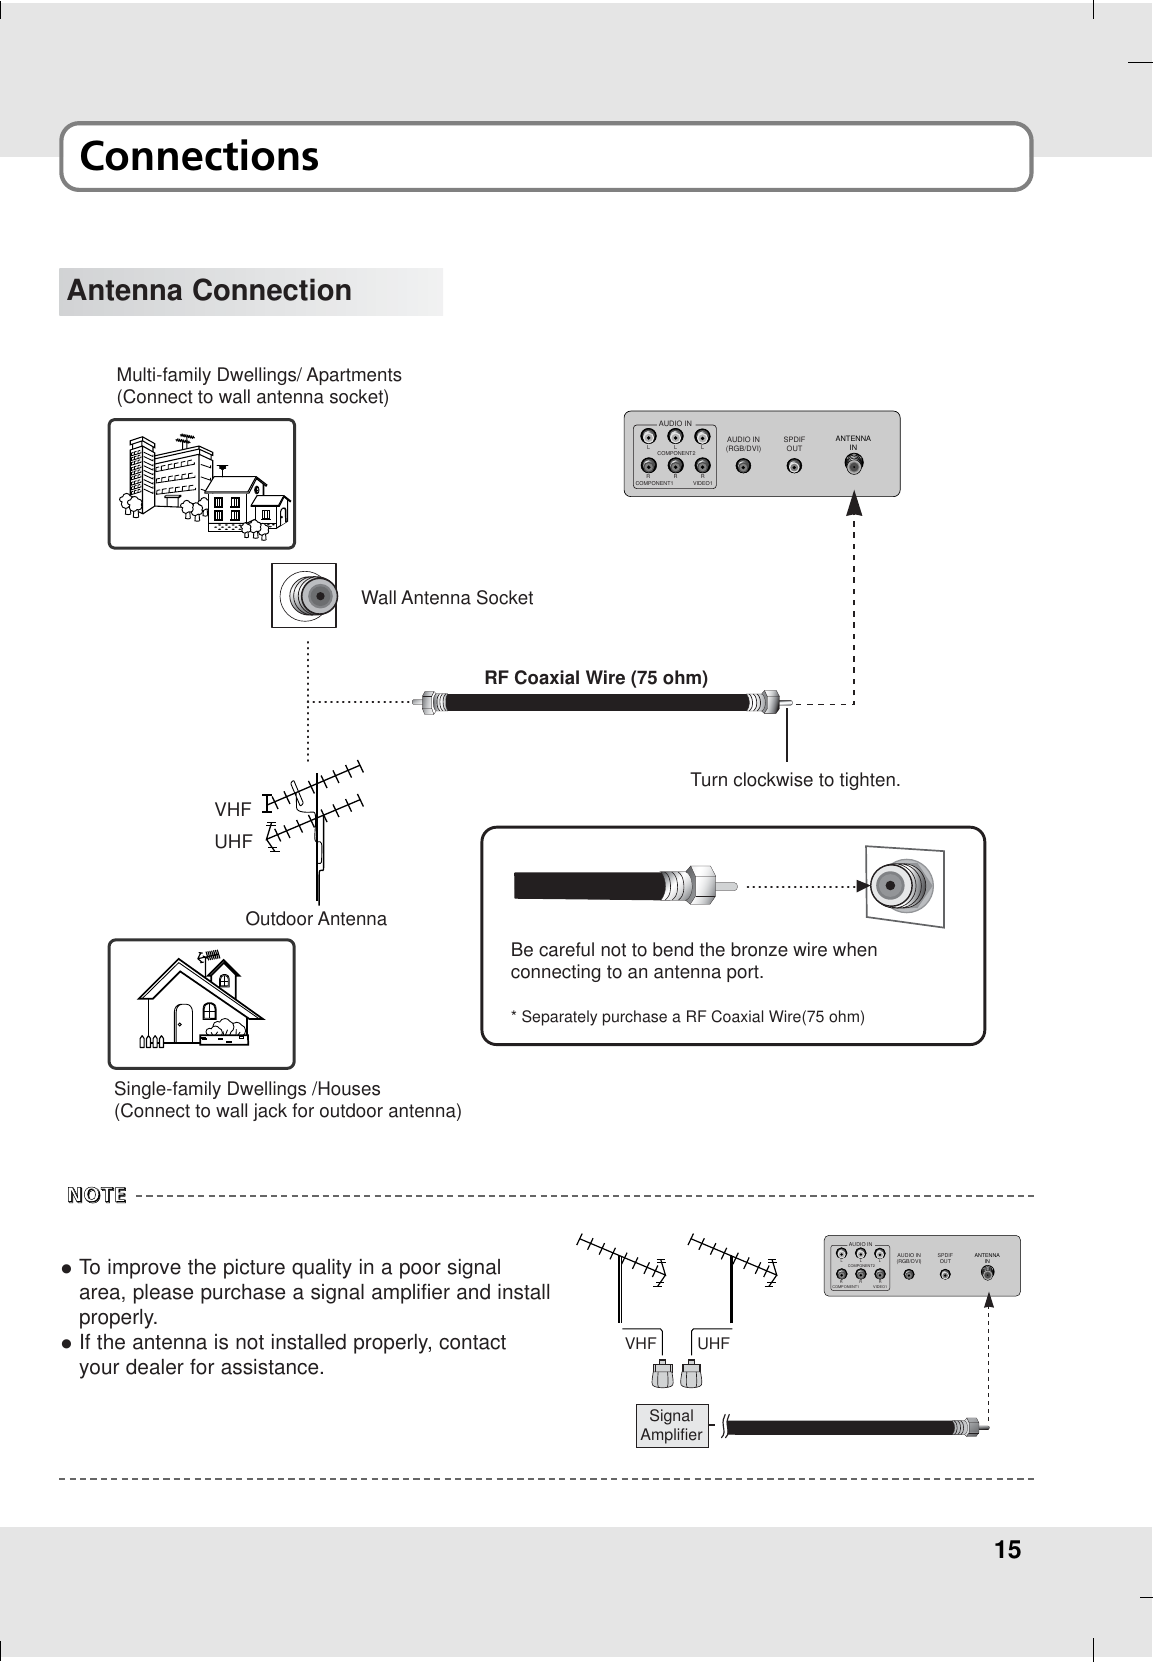 15ConnectionsAntenna ConnectionAUDIO IN(RGB/DVI)SPDIFOUTANTENNAINL LR RCOMPONENT2VIDEO1RLAUDIO INCOMPONENT1Multi-family Dwellings/ Apartments(Connect to wall antenna socket)Single-family Dwellings /Houses(Connect to wall jack for outdoor antenna)Wall Antenna SocketRF Coaxial Wire (75 ohm)VHFUHFOutdoor AntennaTurn clockwise to tighten.Be careful not to bend the bronze wire whenconnecting to an antenna port.* Separately purchase a RF Coaxial Wire(75 ohm)OTo improve the picture quality in a poor signalarea, please purchase a signal amplifier and installproperly.OIf the antenna is not installed properly, contactyour dealer for assistance.NNNNOOOOTTTTEEEEAUDIO IN(RGB/DVI) SPDIFOUTANTENNAINL LR RCOMPONENT2VIDEO1RLAUDIO INCOMPONENT1VHF UHFSignalAmplifier